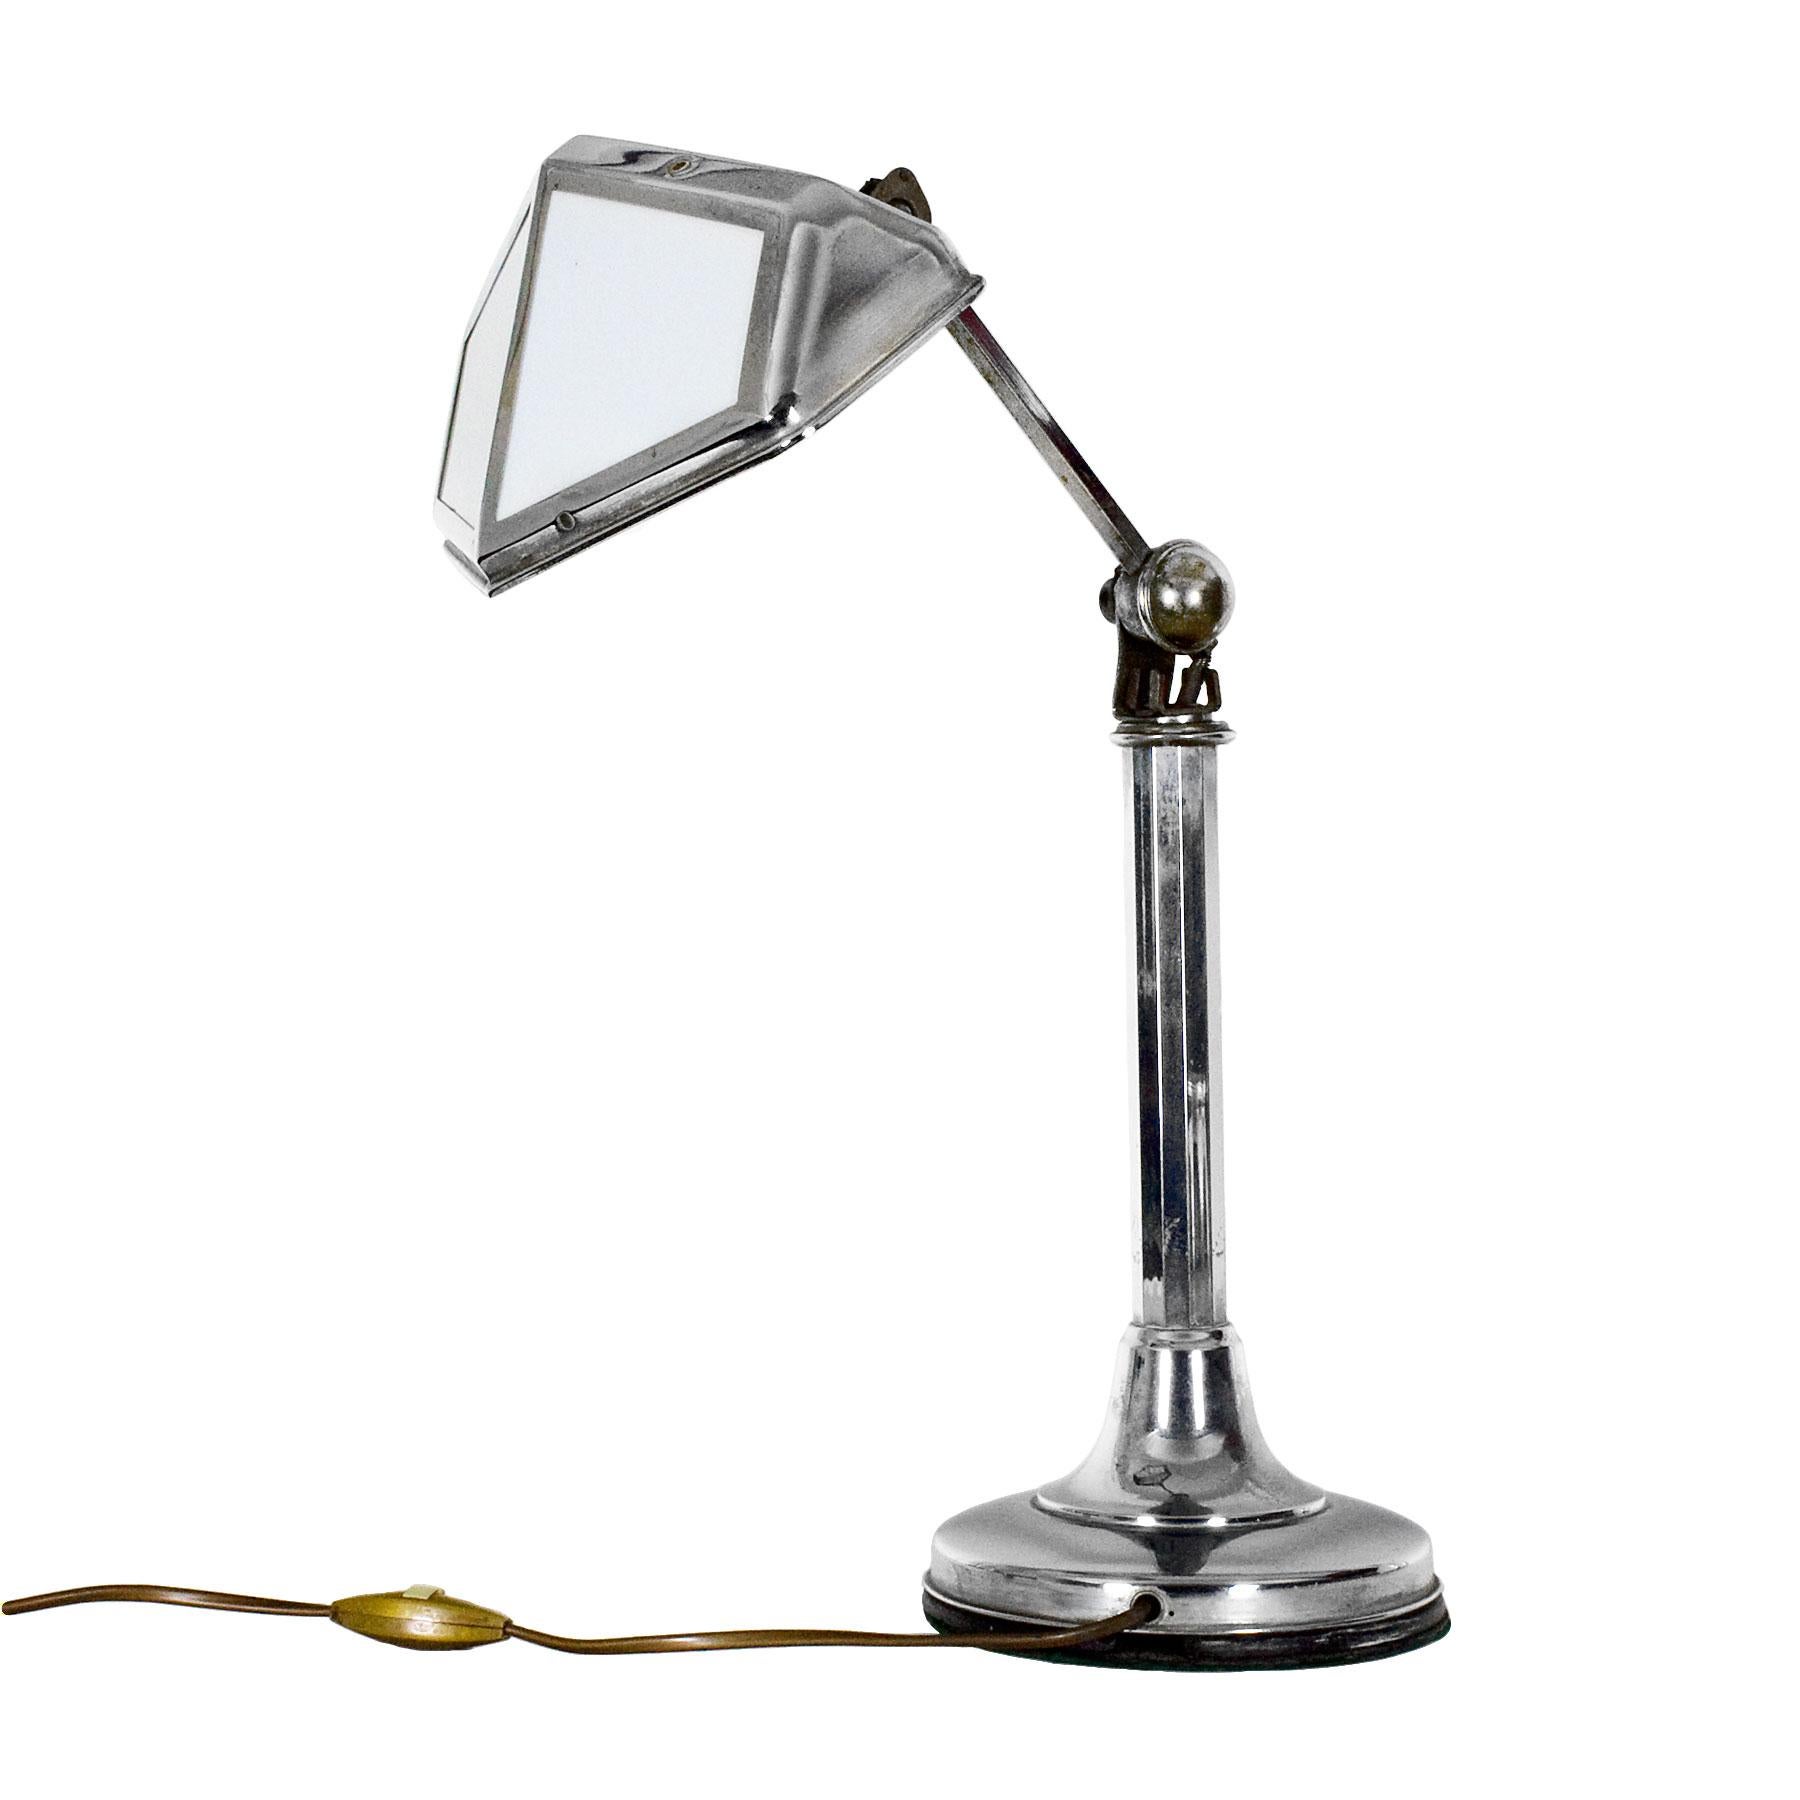 Art Deco desk lamp, chrome-plated metal and white opaline, adjustable height and inclination. Bayonet bulbs
Registered design: Pirouette.

France, circa 1930

Measurements:
Depth 23 cm
Width Max. 40 cm Min. 26 cm
Height Max. 52 cm Min: 38 cm.